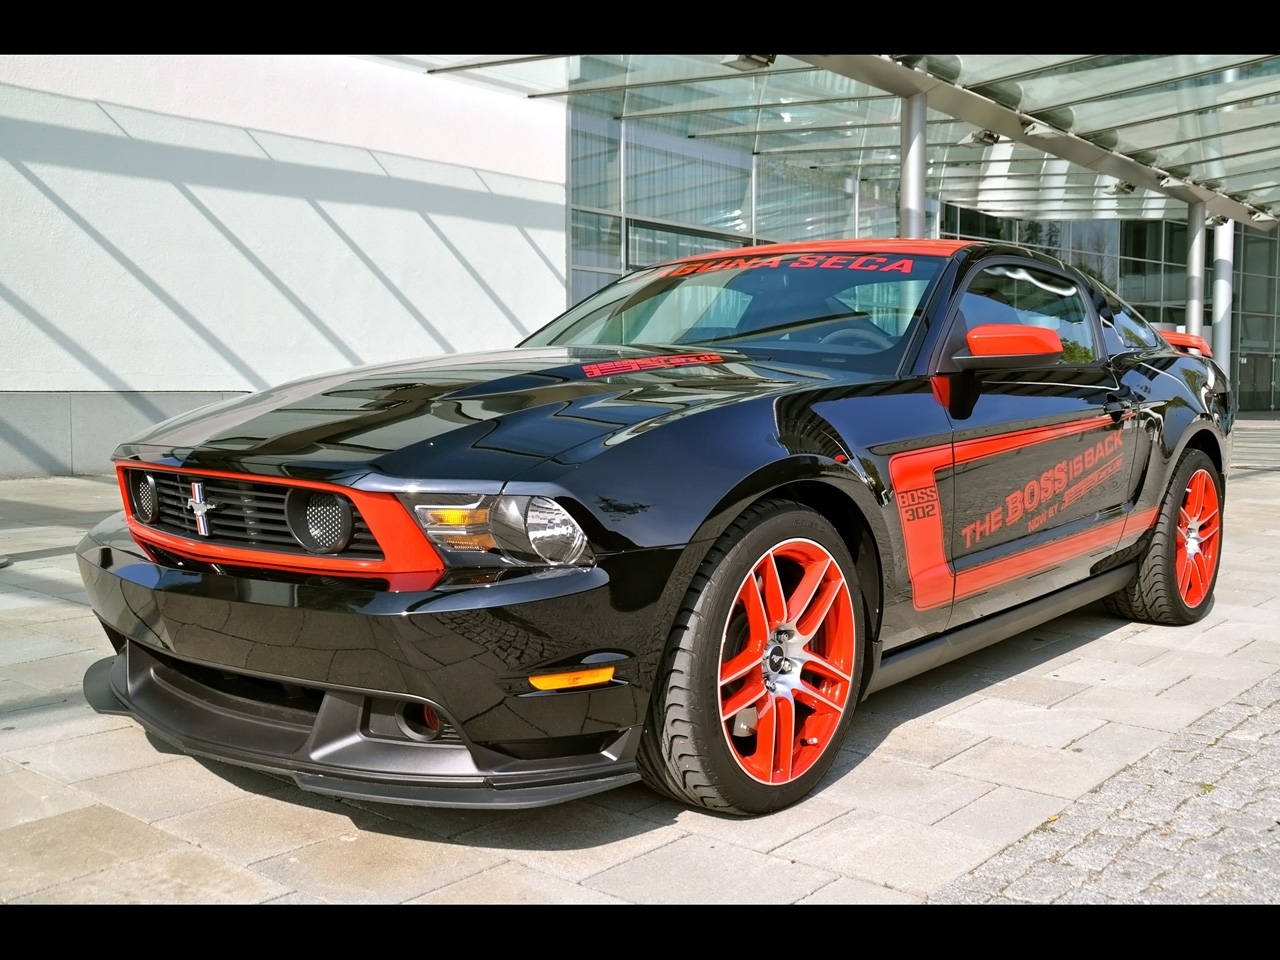 ford, transport, auto, mustang 1080p